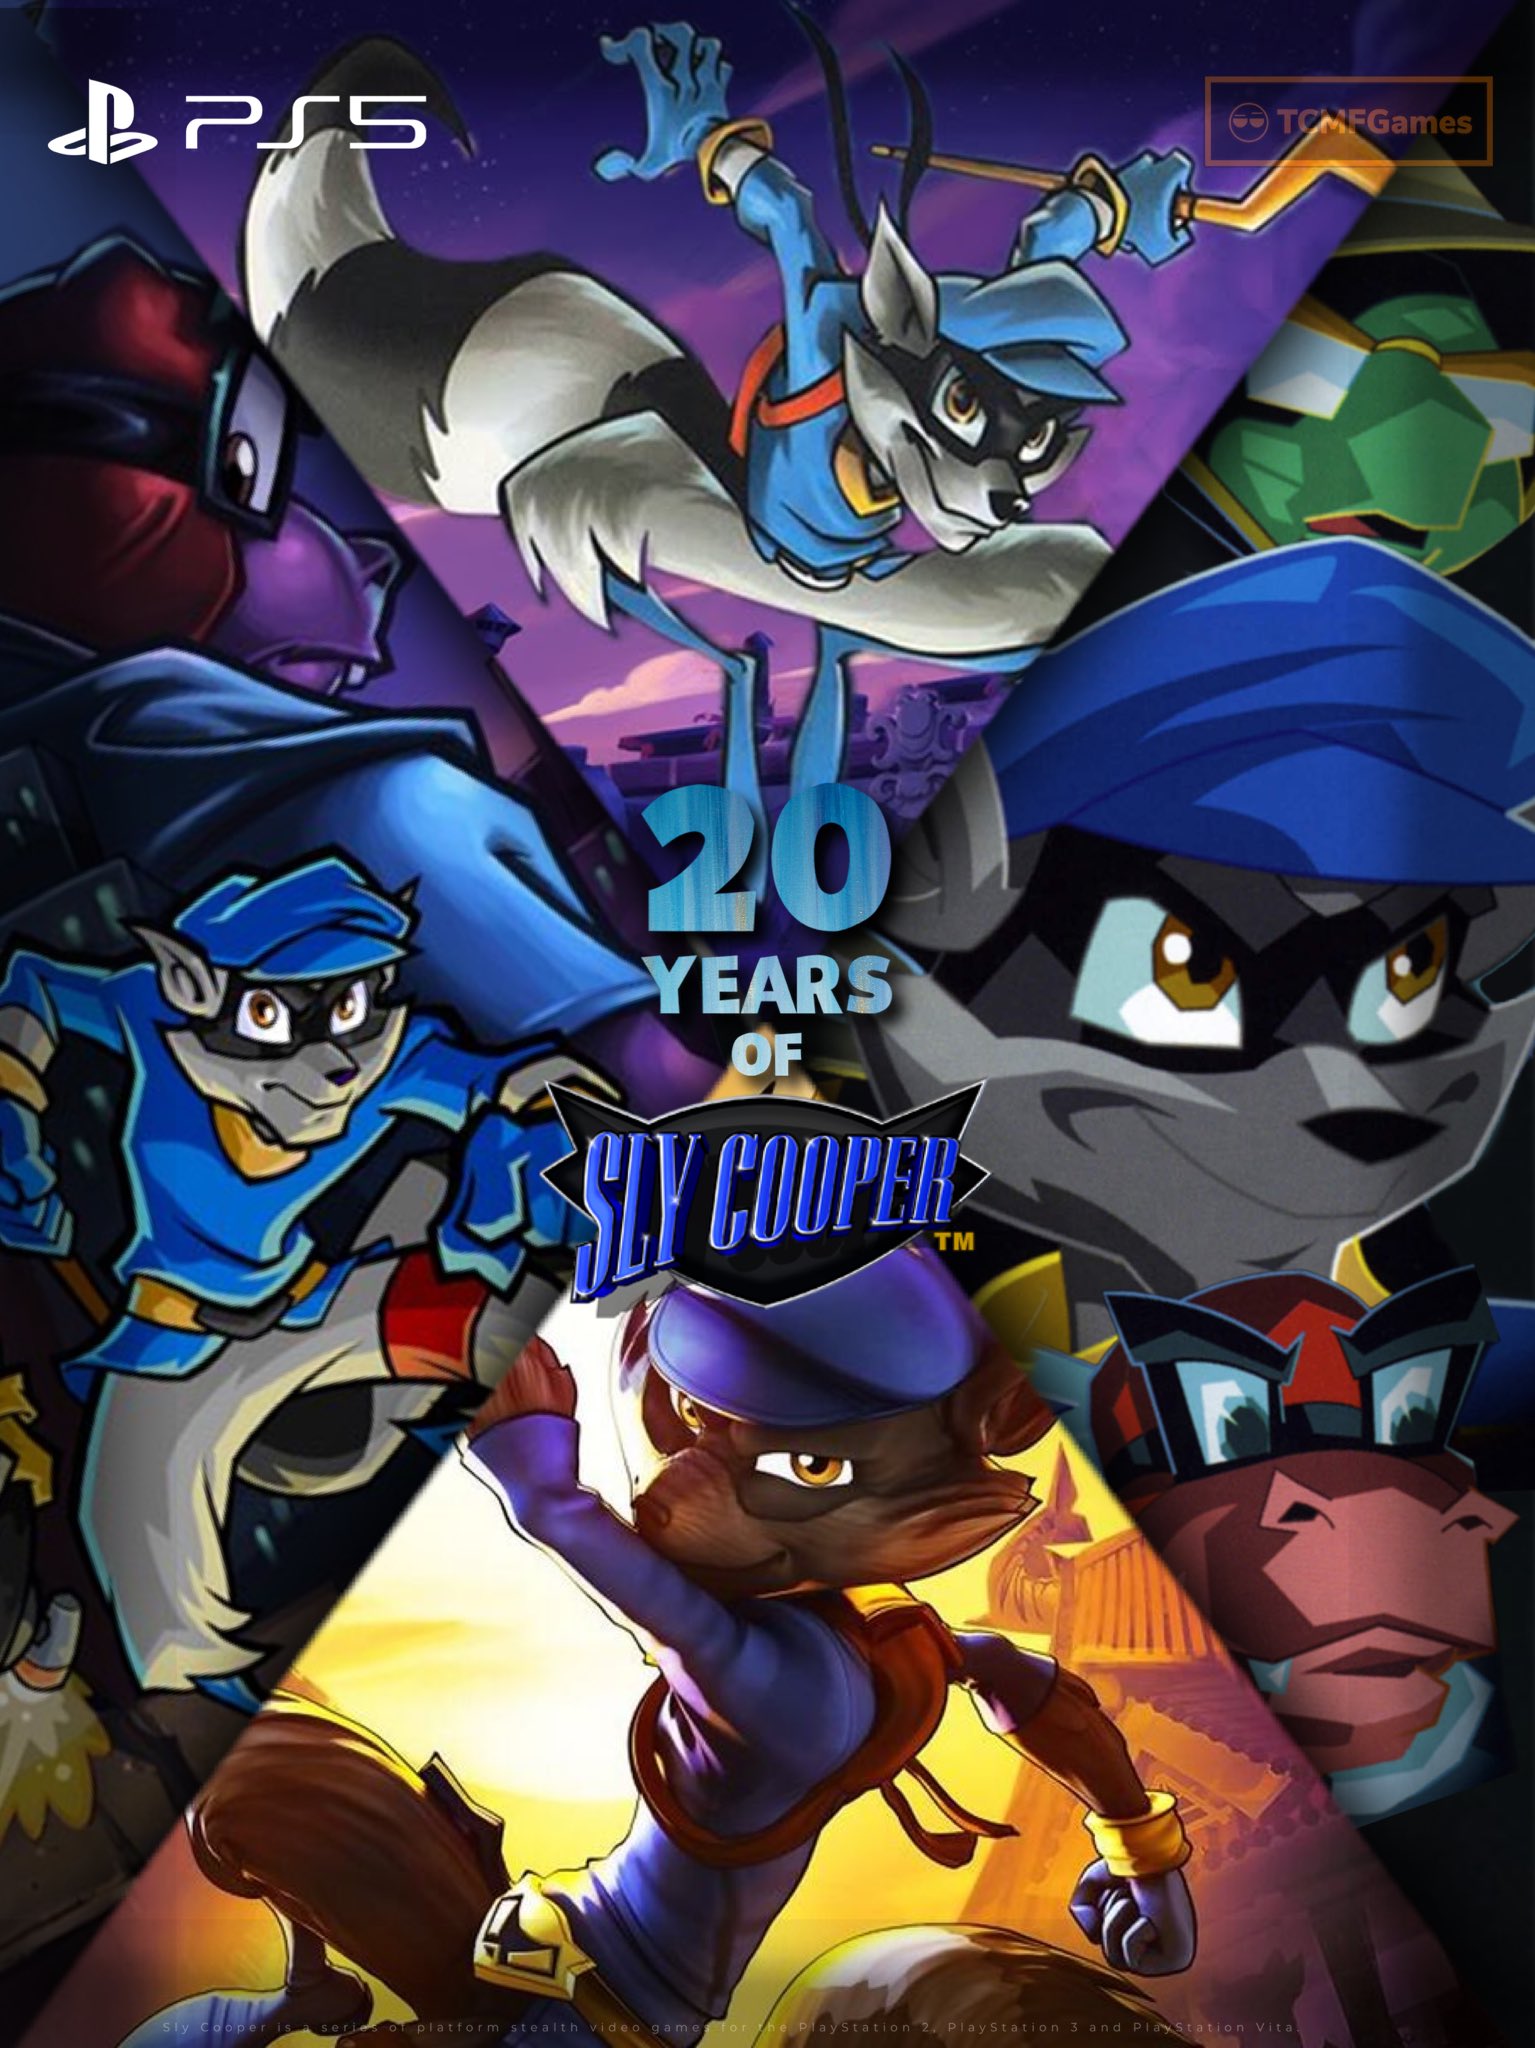 stof Ruddy Had TCMFGames ❄️ on Twitter: "Happy 20 years to the Sly Cooper series. A  legendary franchise. 🐢 🦛 🦝 - PS5 | PlayStation https://t.co/rp7TM8qJkt"  / Twitter